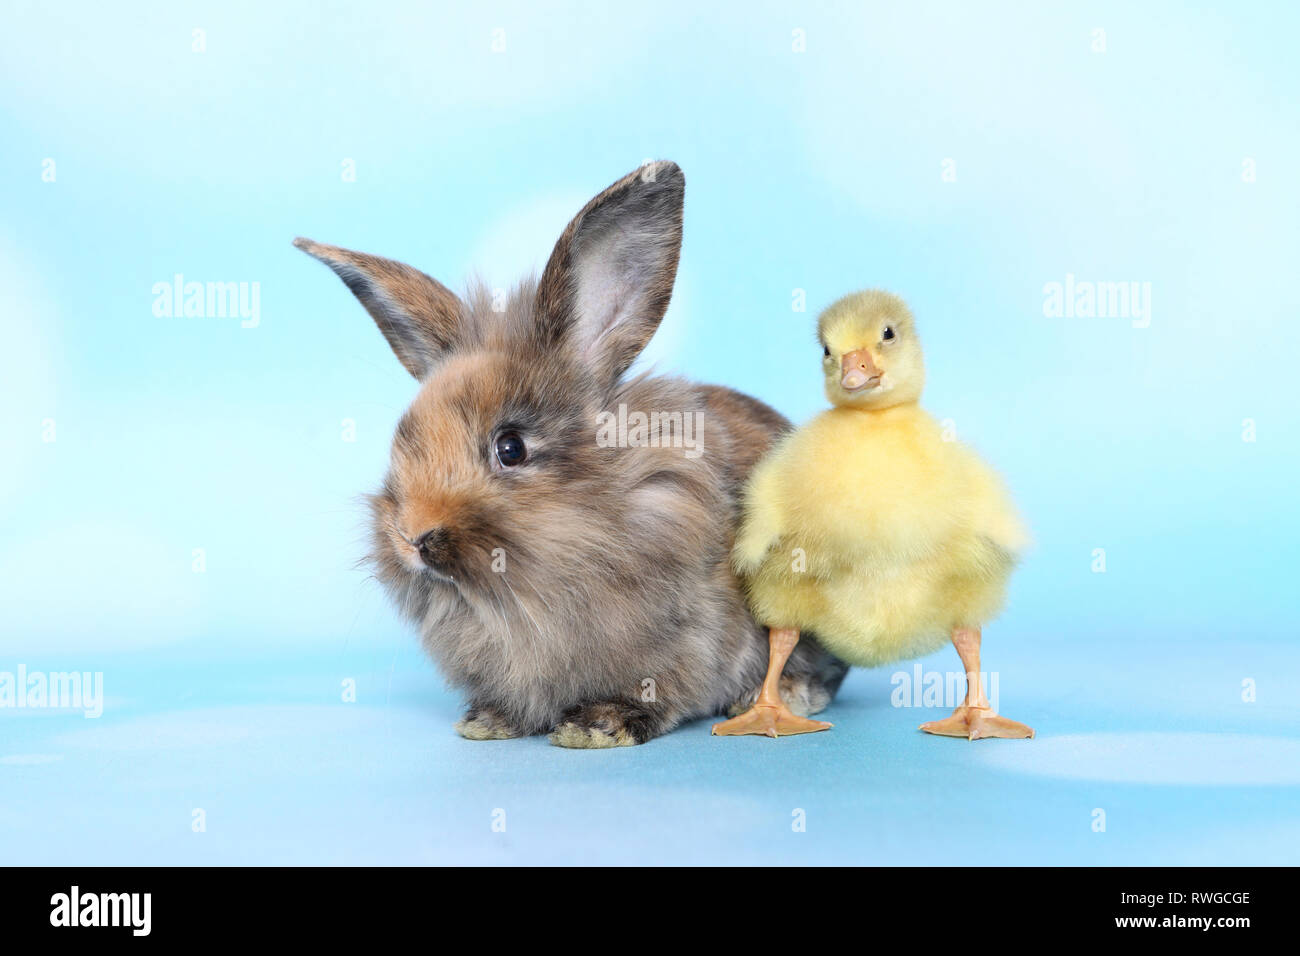 Domestic Goose. Gosling standing next to adult Dwarf Rabbit. Studio picture, seen against a light blue background. Germany Stock Photo